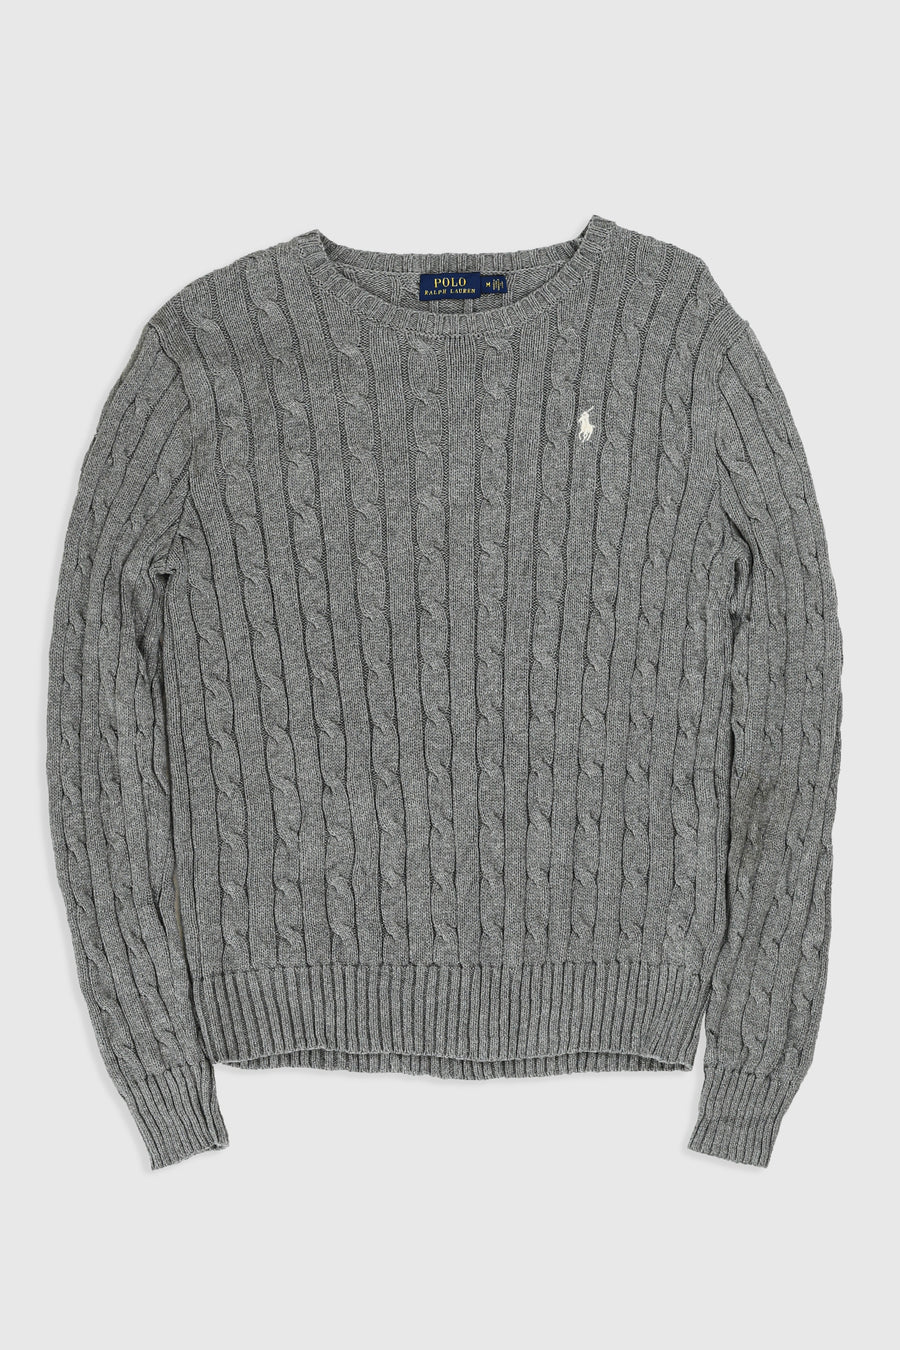 Vintage Polo Knit Sweater